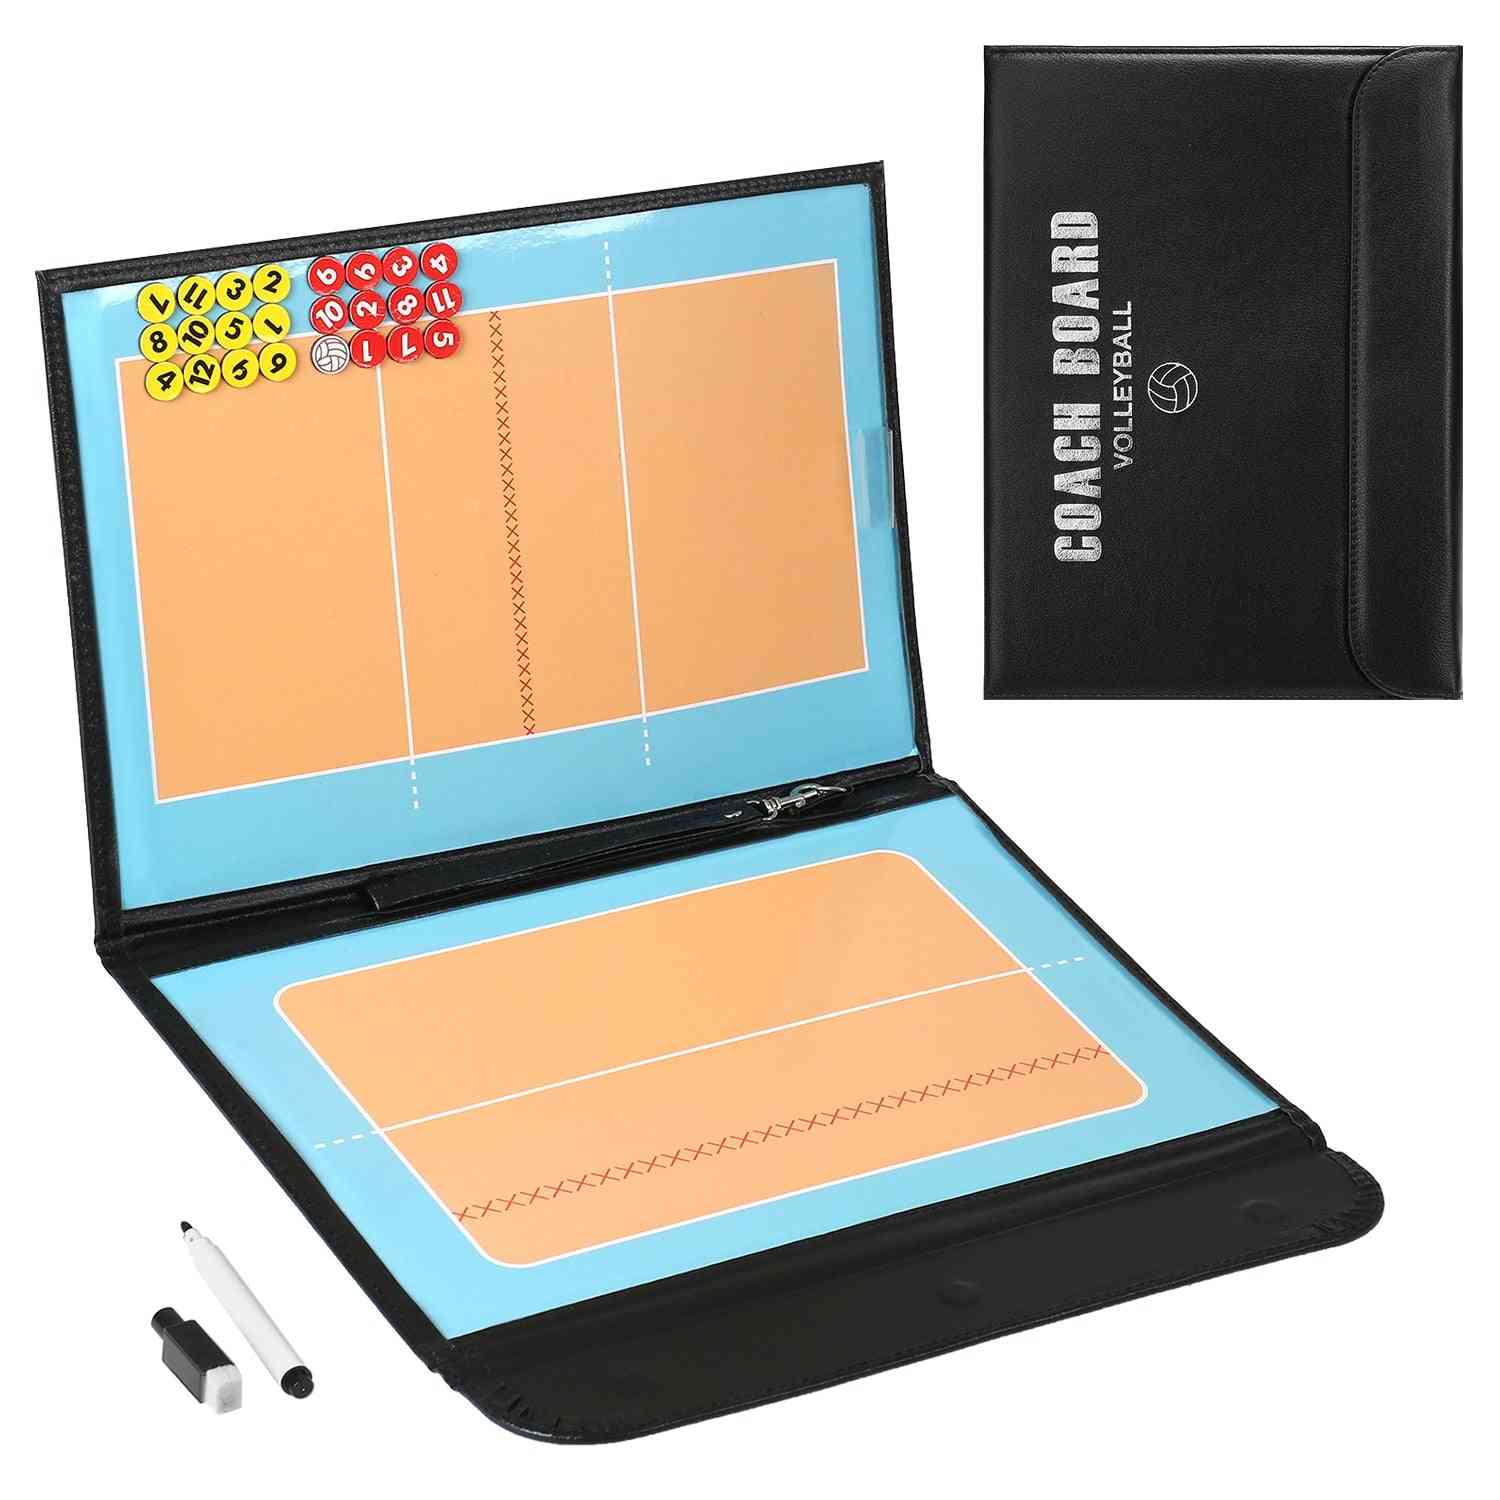 Foldable Magnetic Tactic Board Coaching Volleyball Board